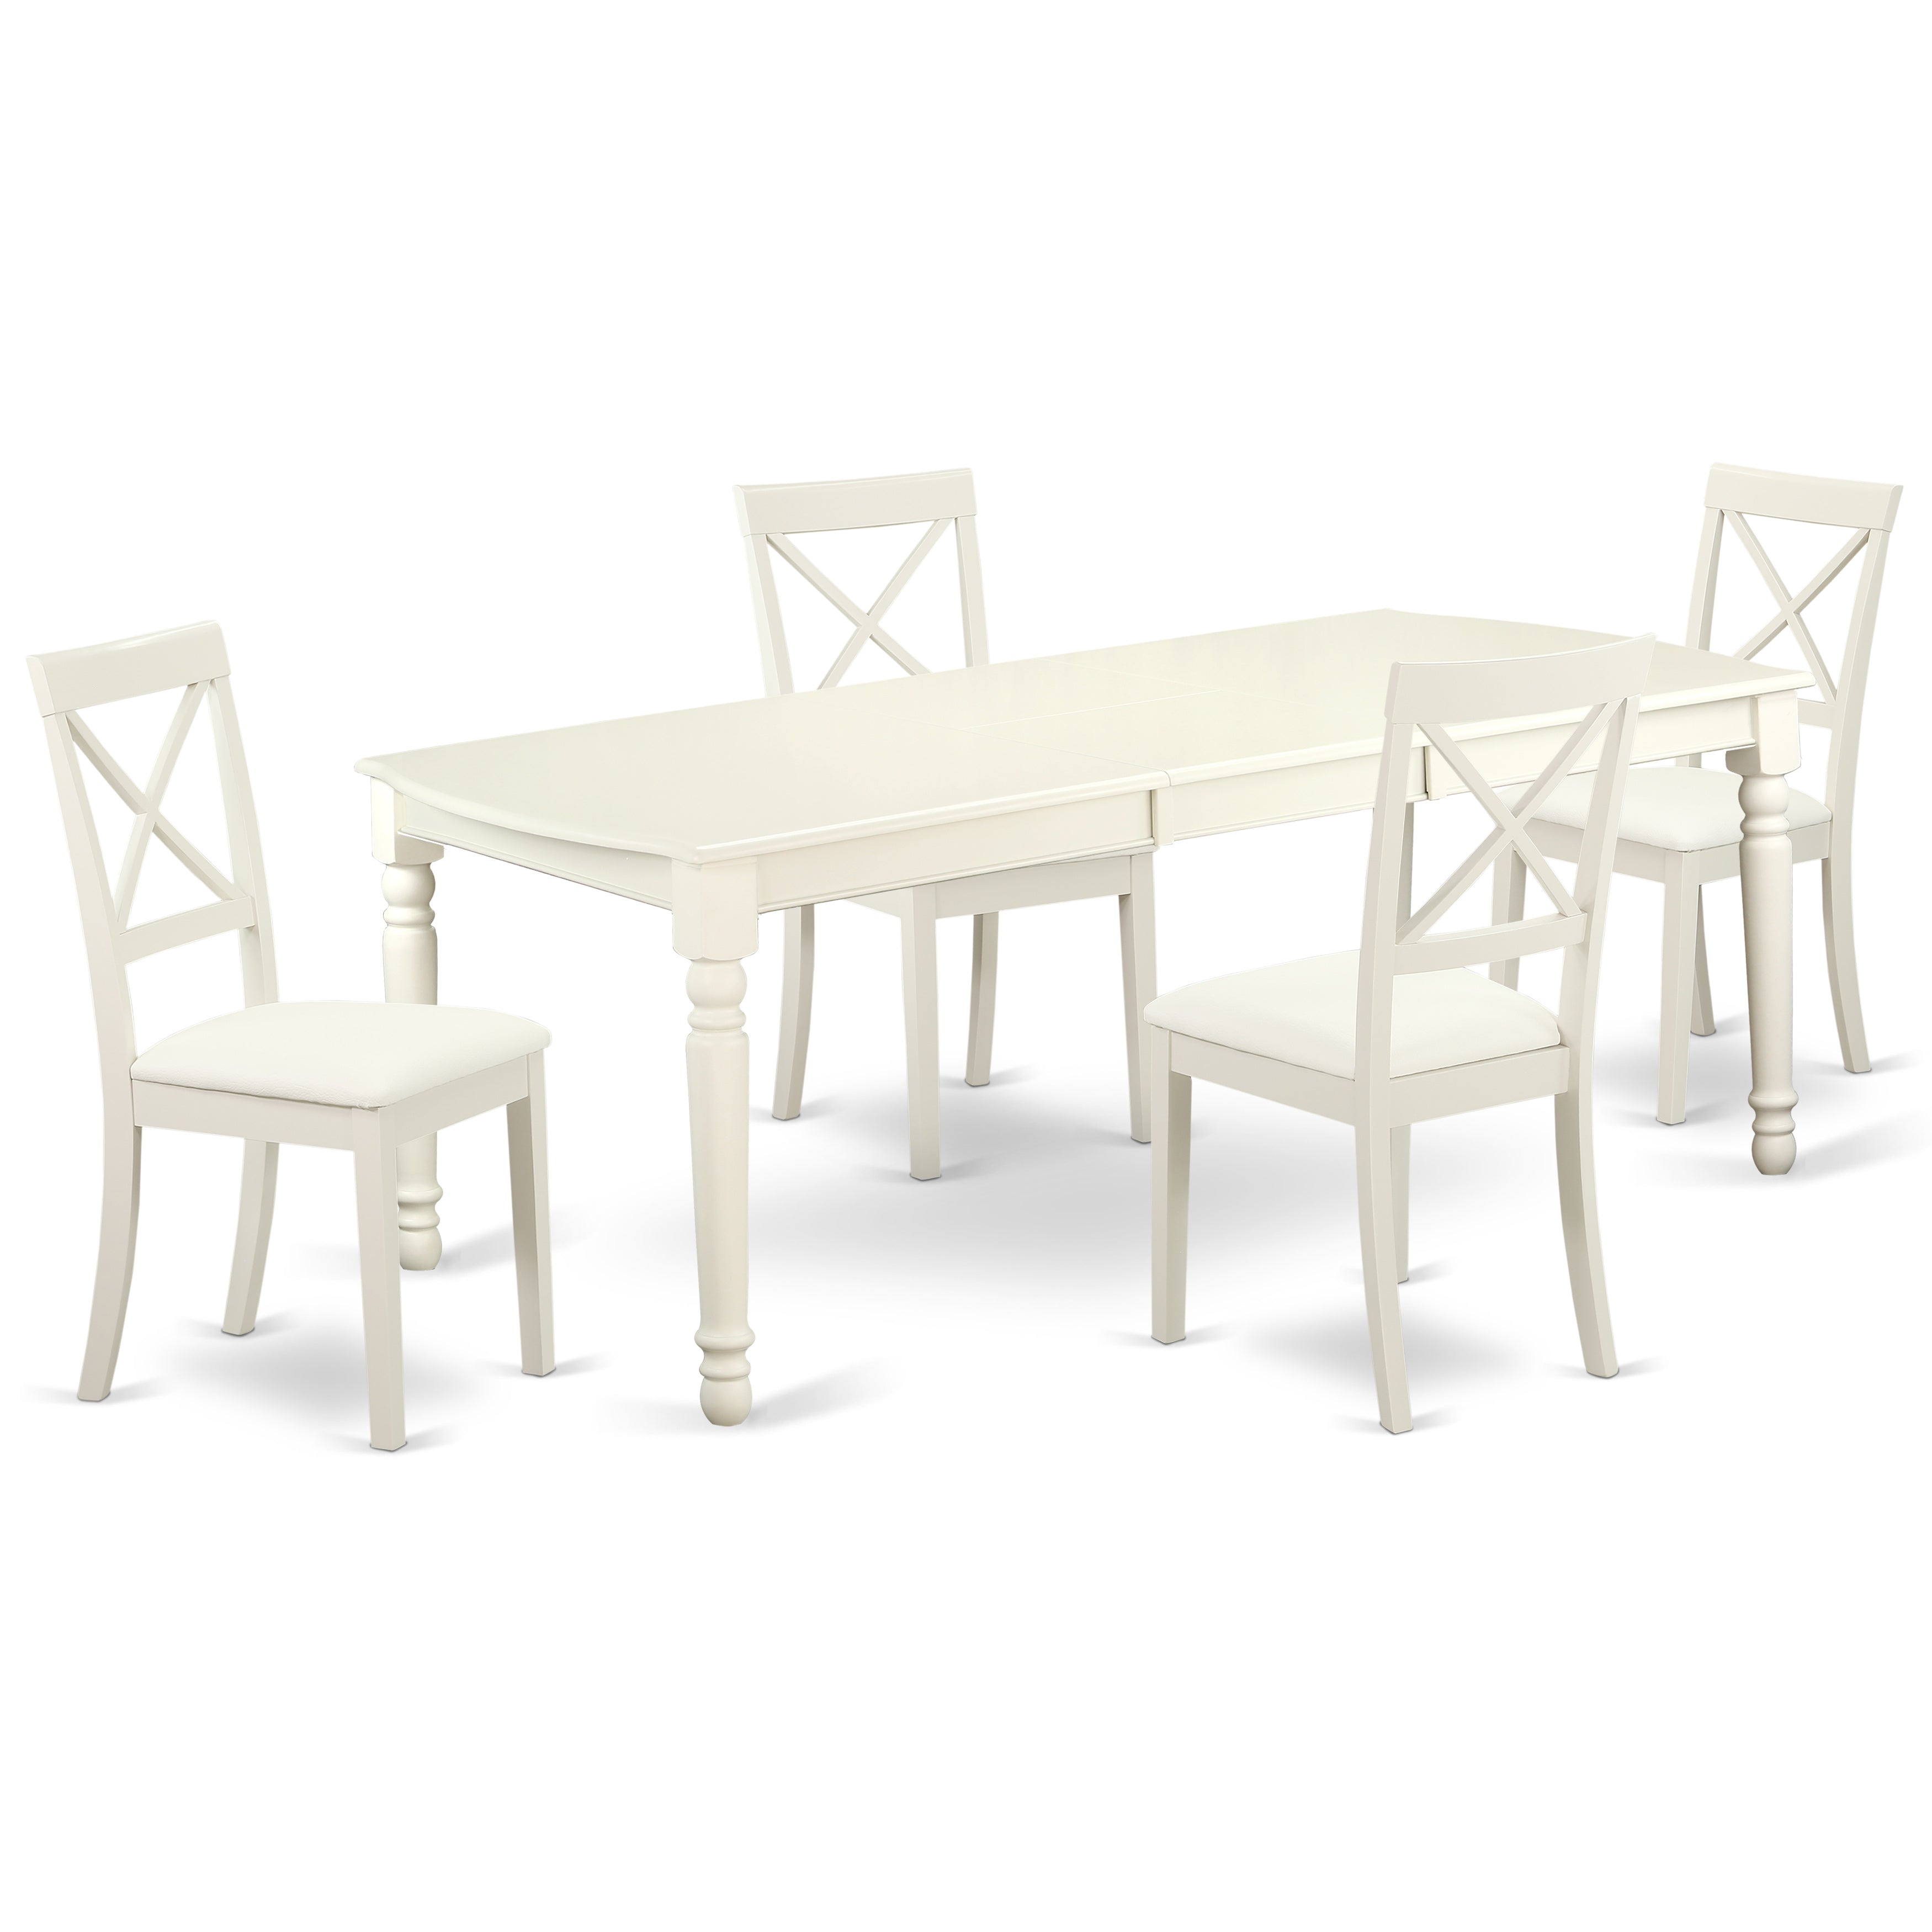 DOBO5-LWH-LC 5 PC Dining table set-Dining table and 4 faux leather seat kitchen chairs in linen white